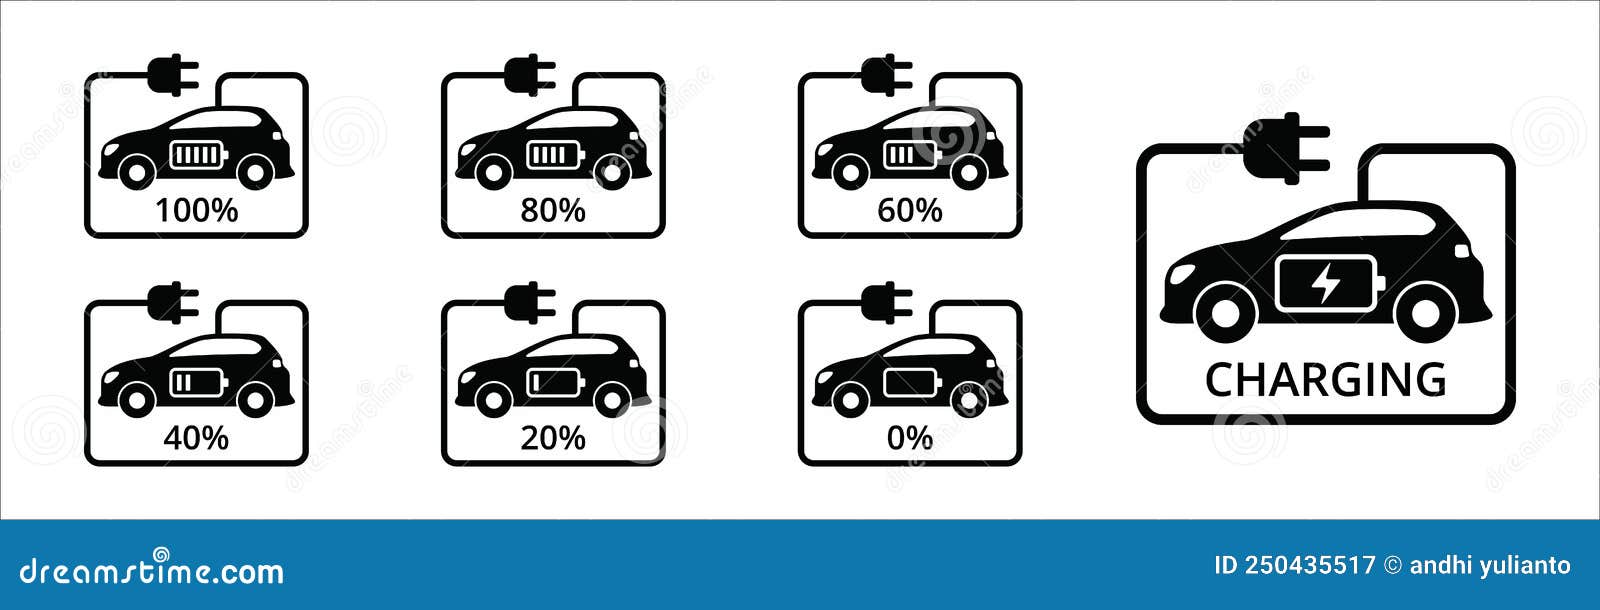 Electric Car Charge Percentage Icon Set. Electric Car with Charging